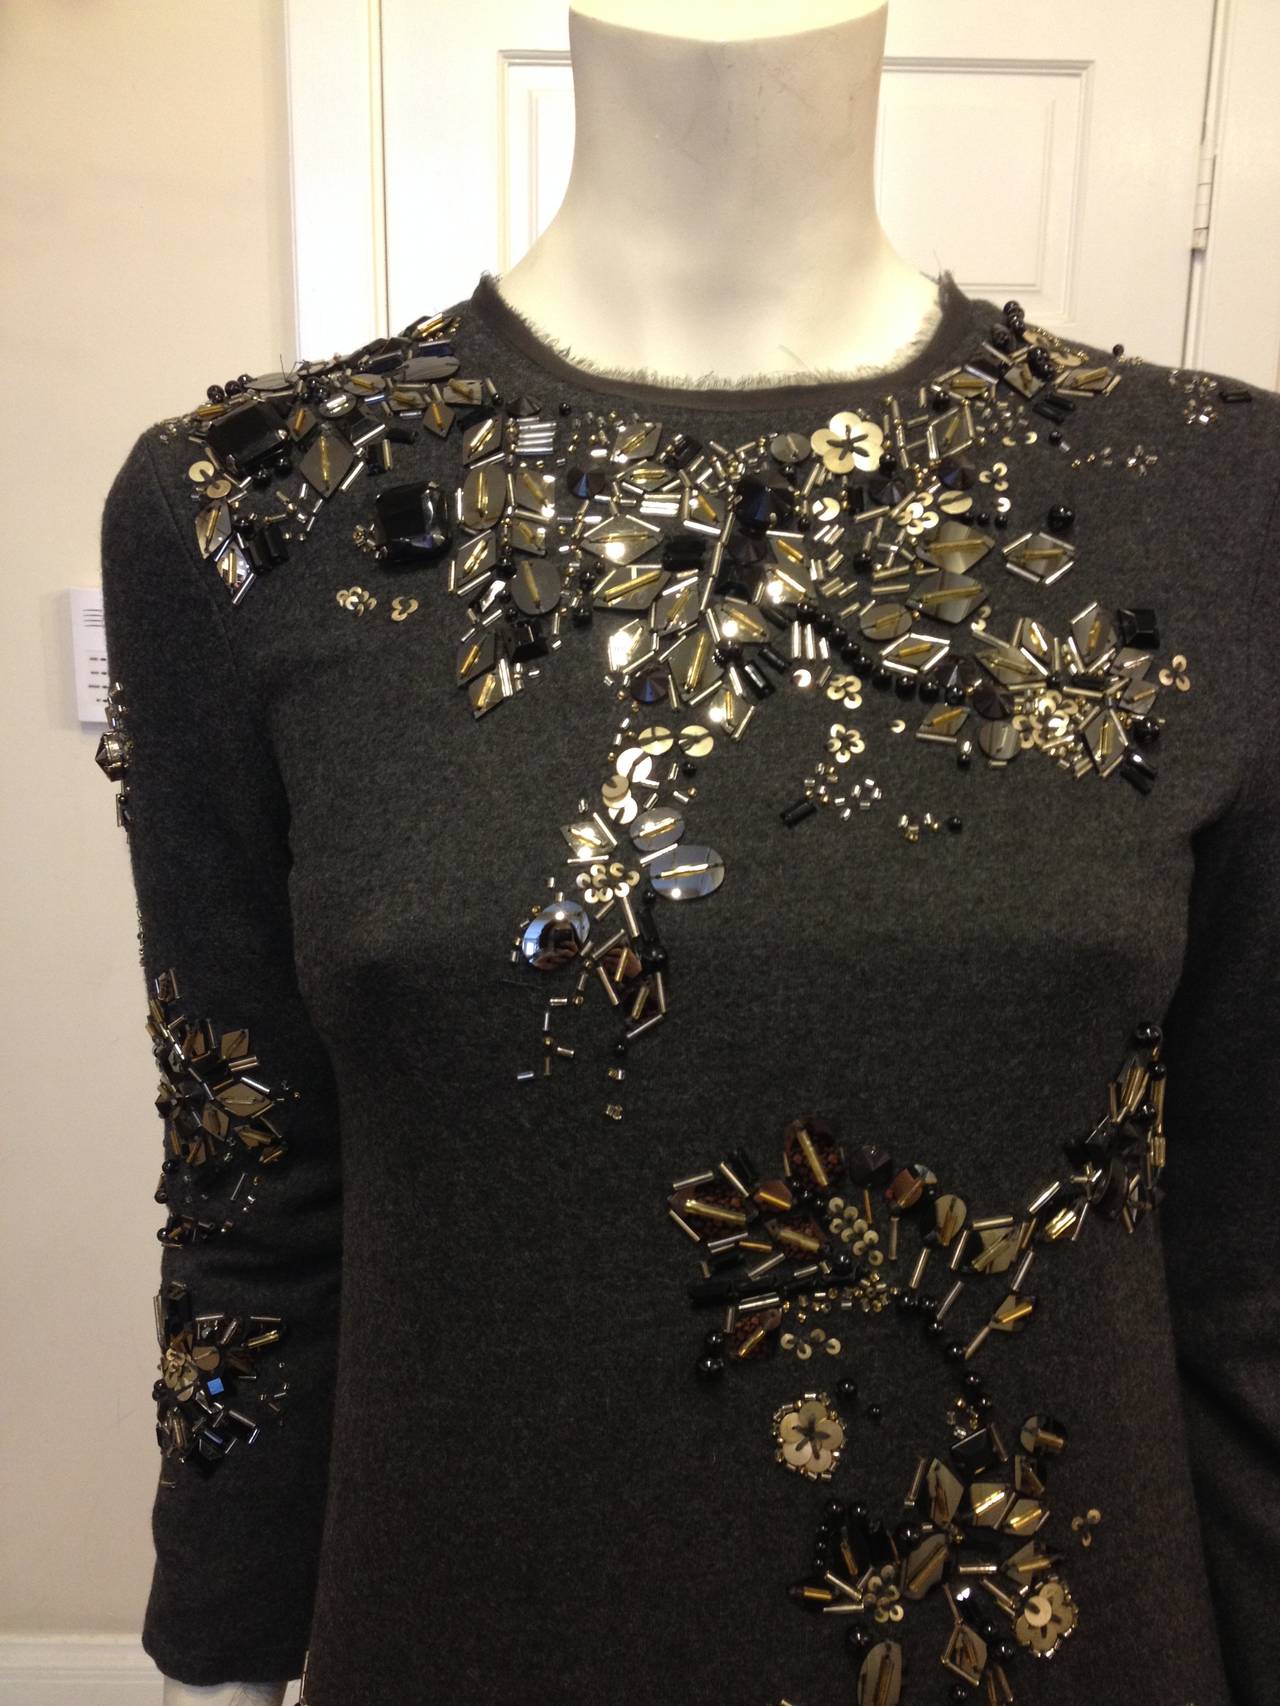 A dress for when you want to look truly breathtaking - this Lanvin is impeccable. Patches of sequins, rhinestones, and tiny glass beads make flower-like formations that that float across the material, punctuating the luxurious charcoal grey